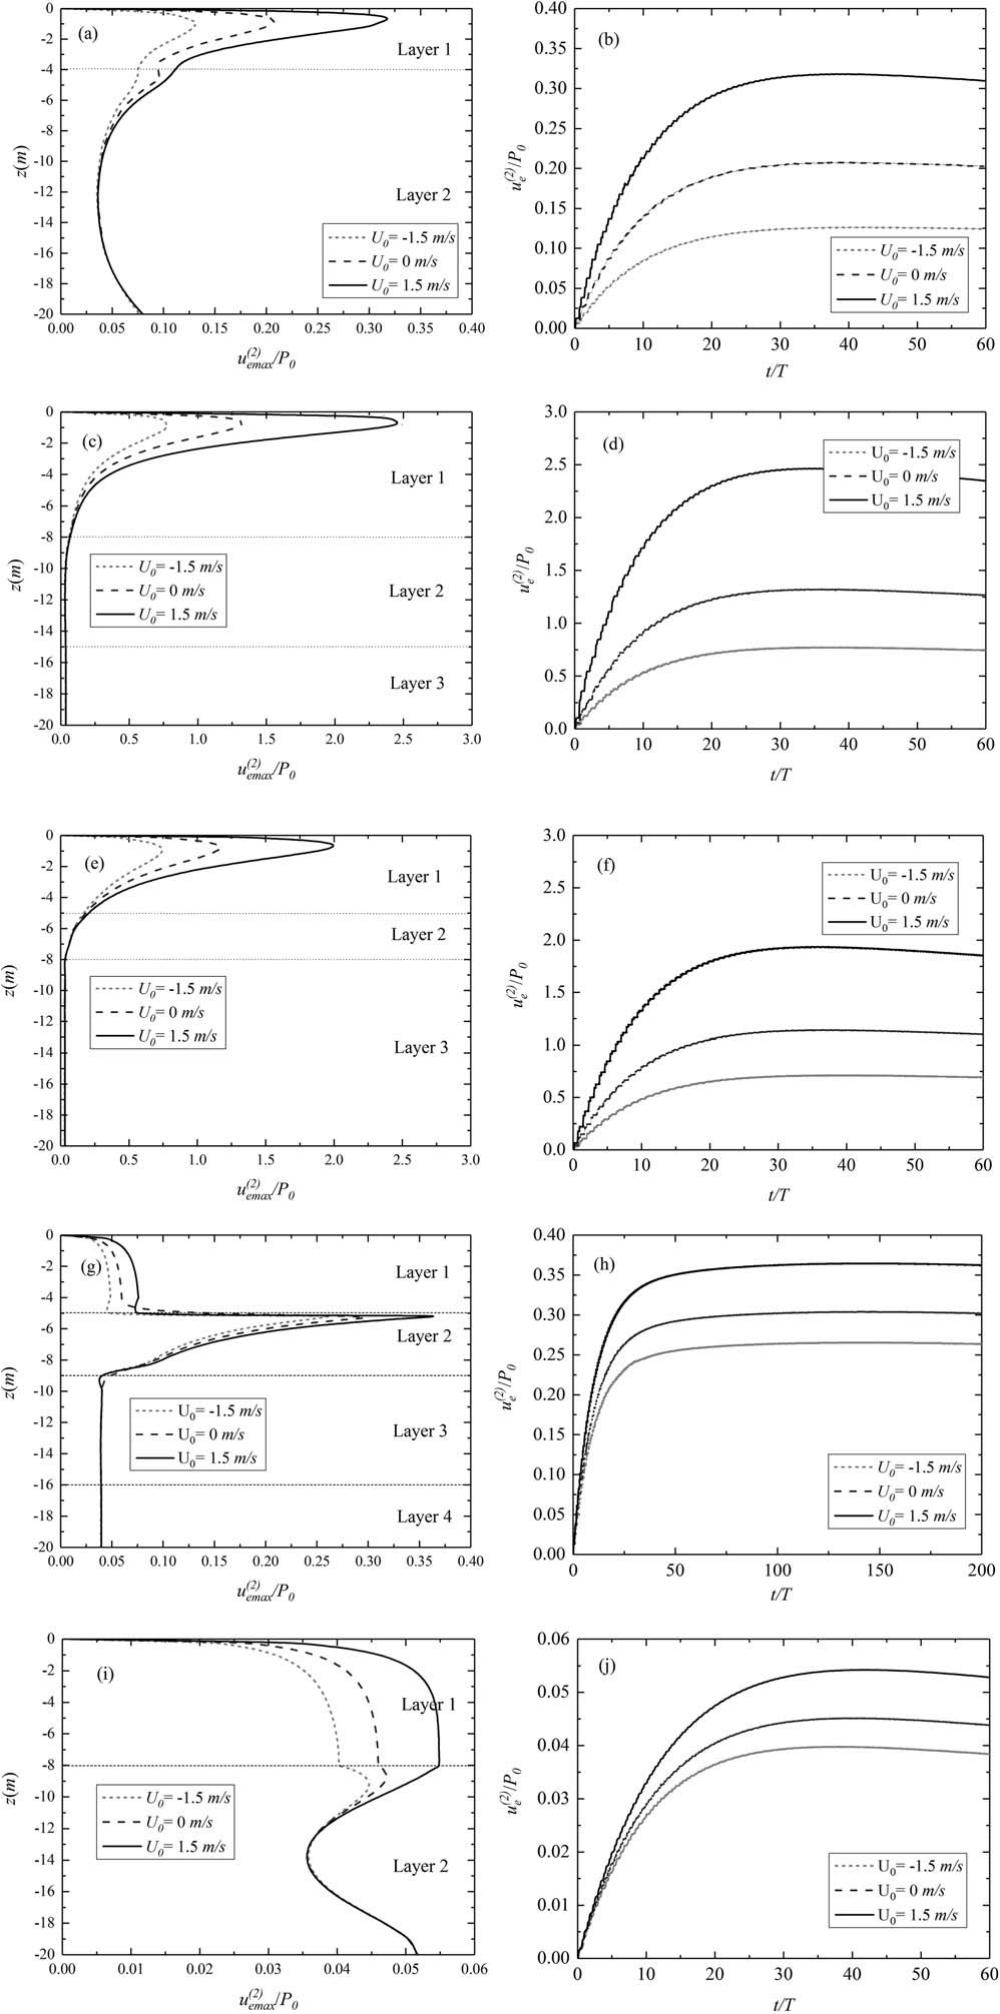 A Numerical Approach To Determine Wave Current Induced Residual Responses In A Layered Seabed